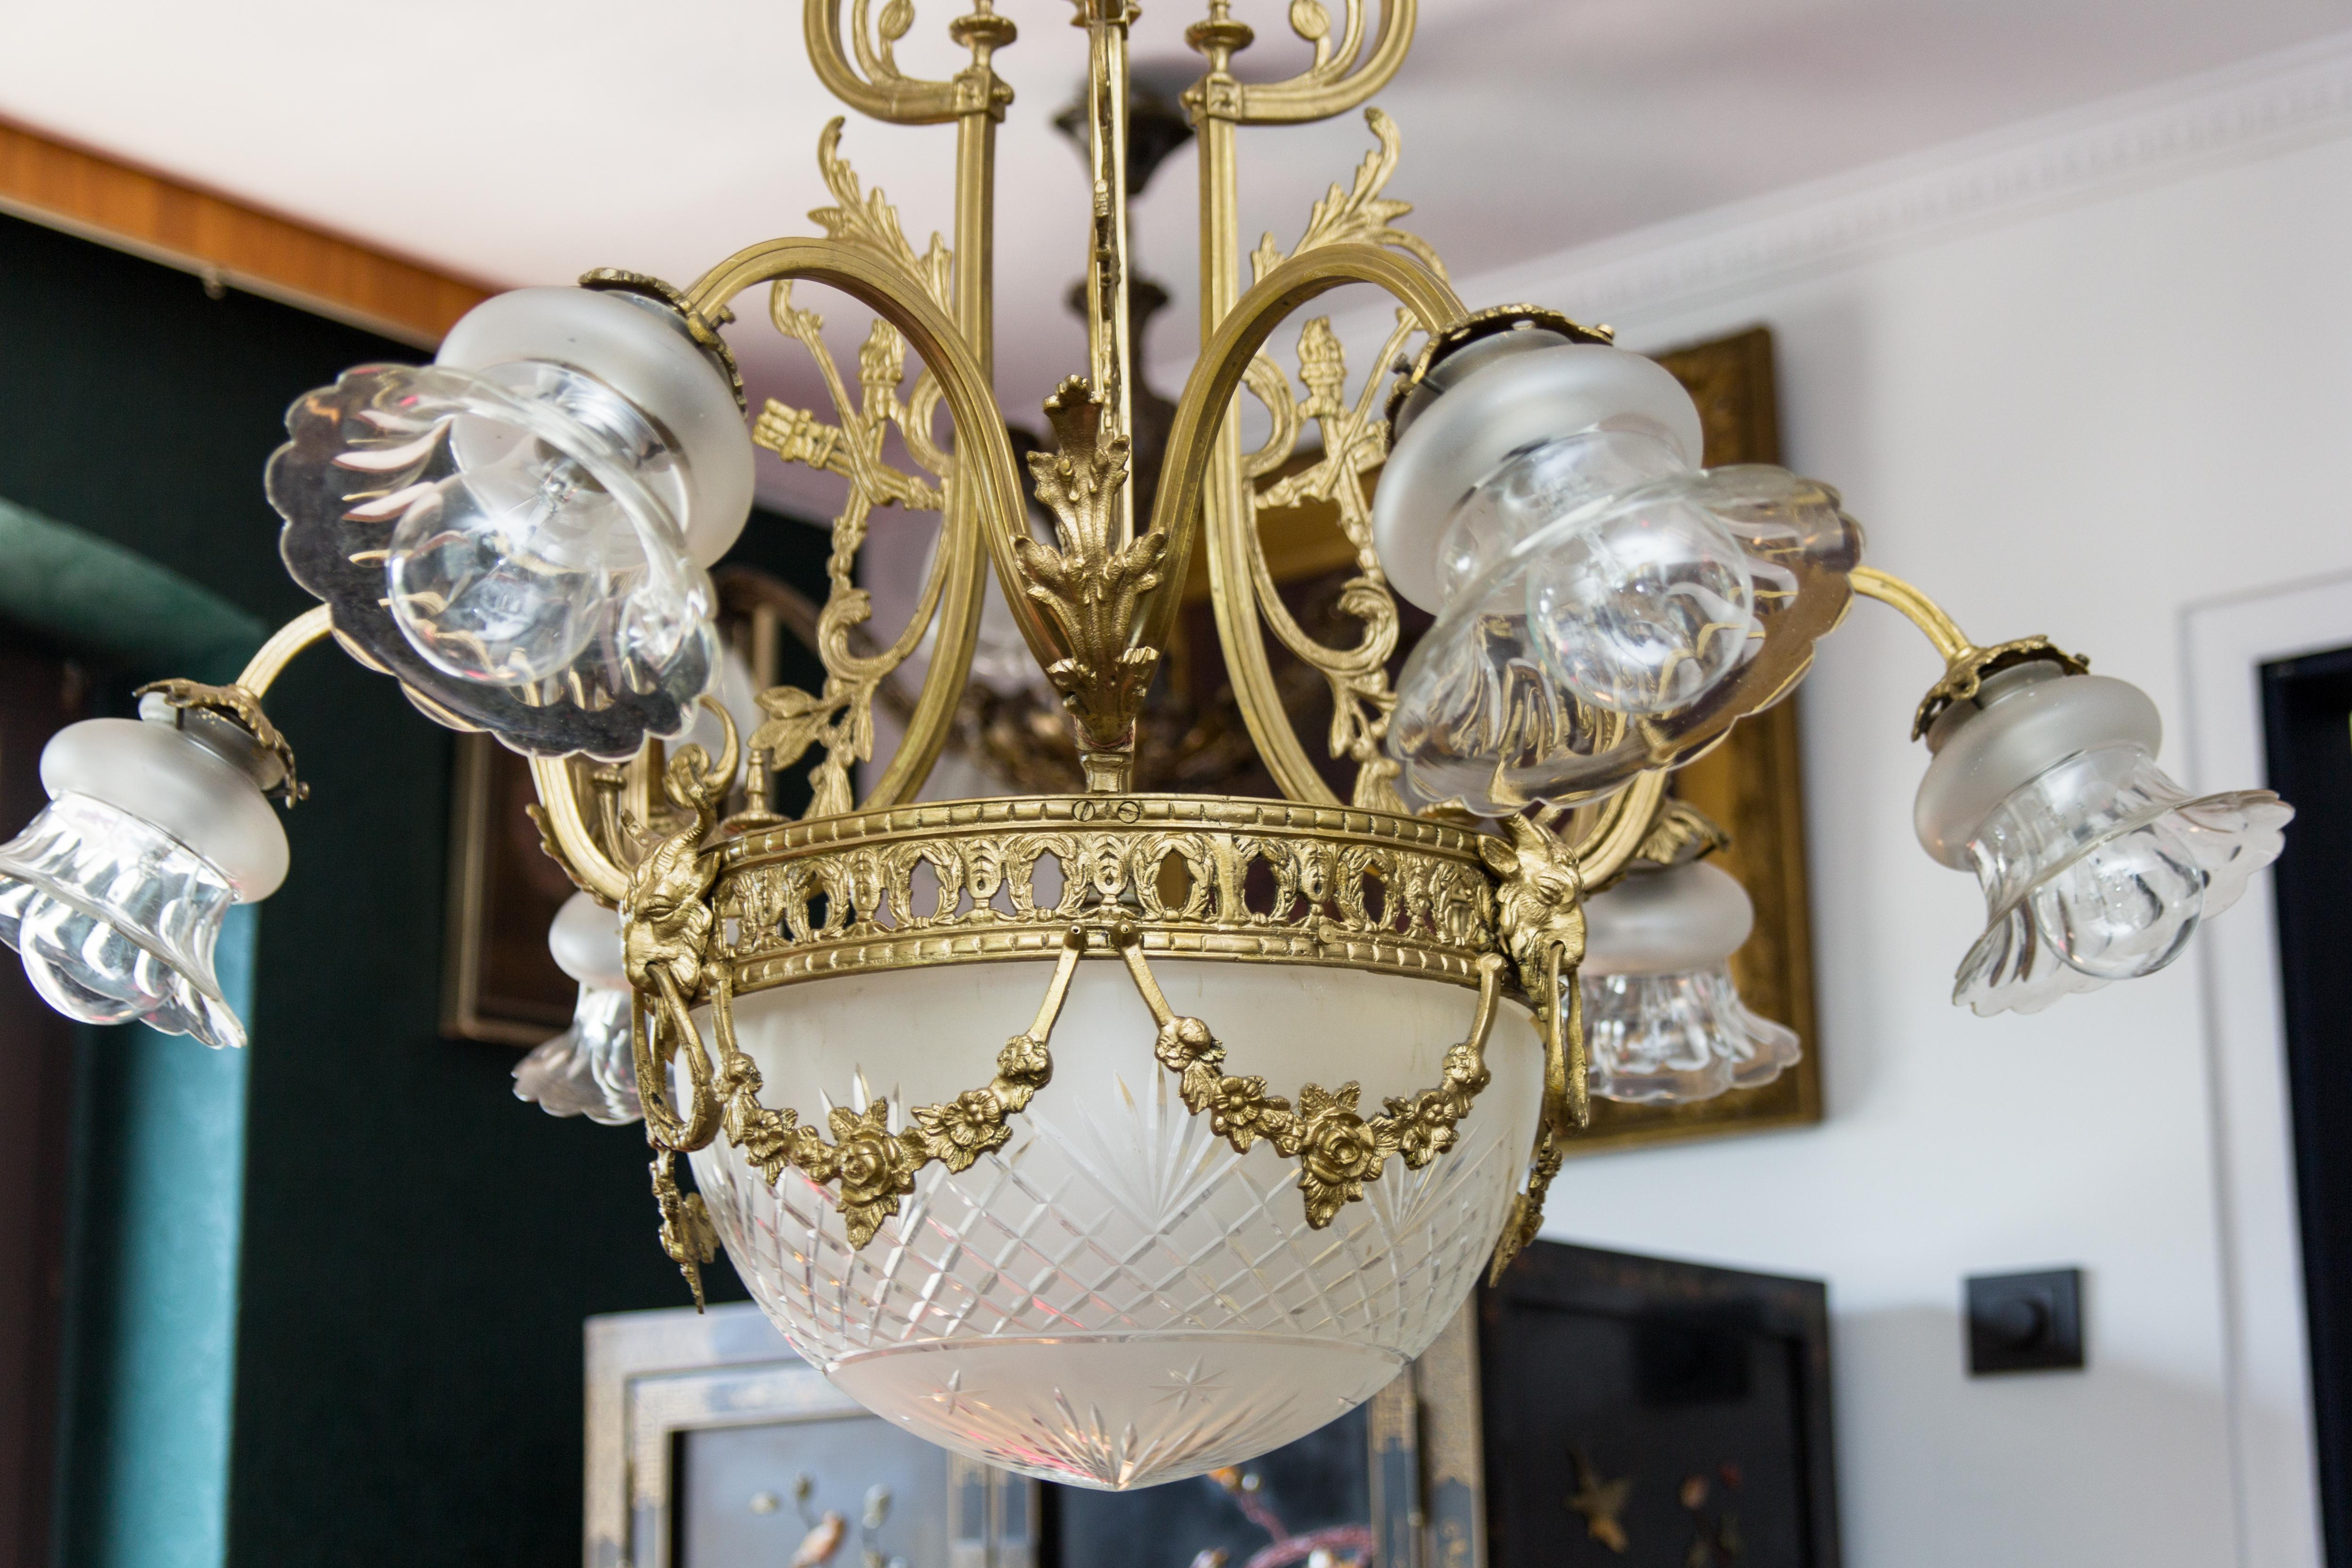 A beautiful Louis XVI-style bronze seven-light chandelier from the 1920s. Six bronze arms, each with floral shape glass lampshade, seventh light is located in the center of the cut glass lampshade, decorated with bronze flower chains held by ram